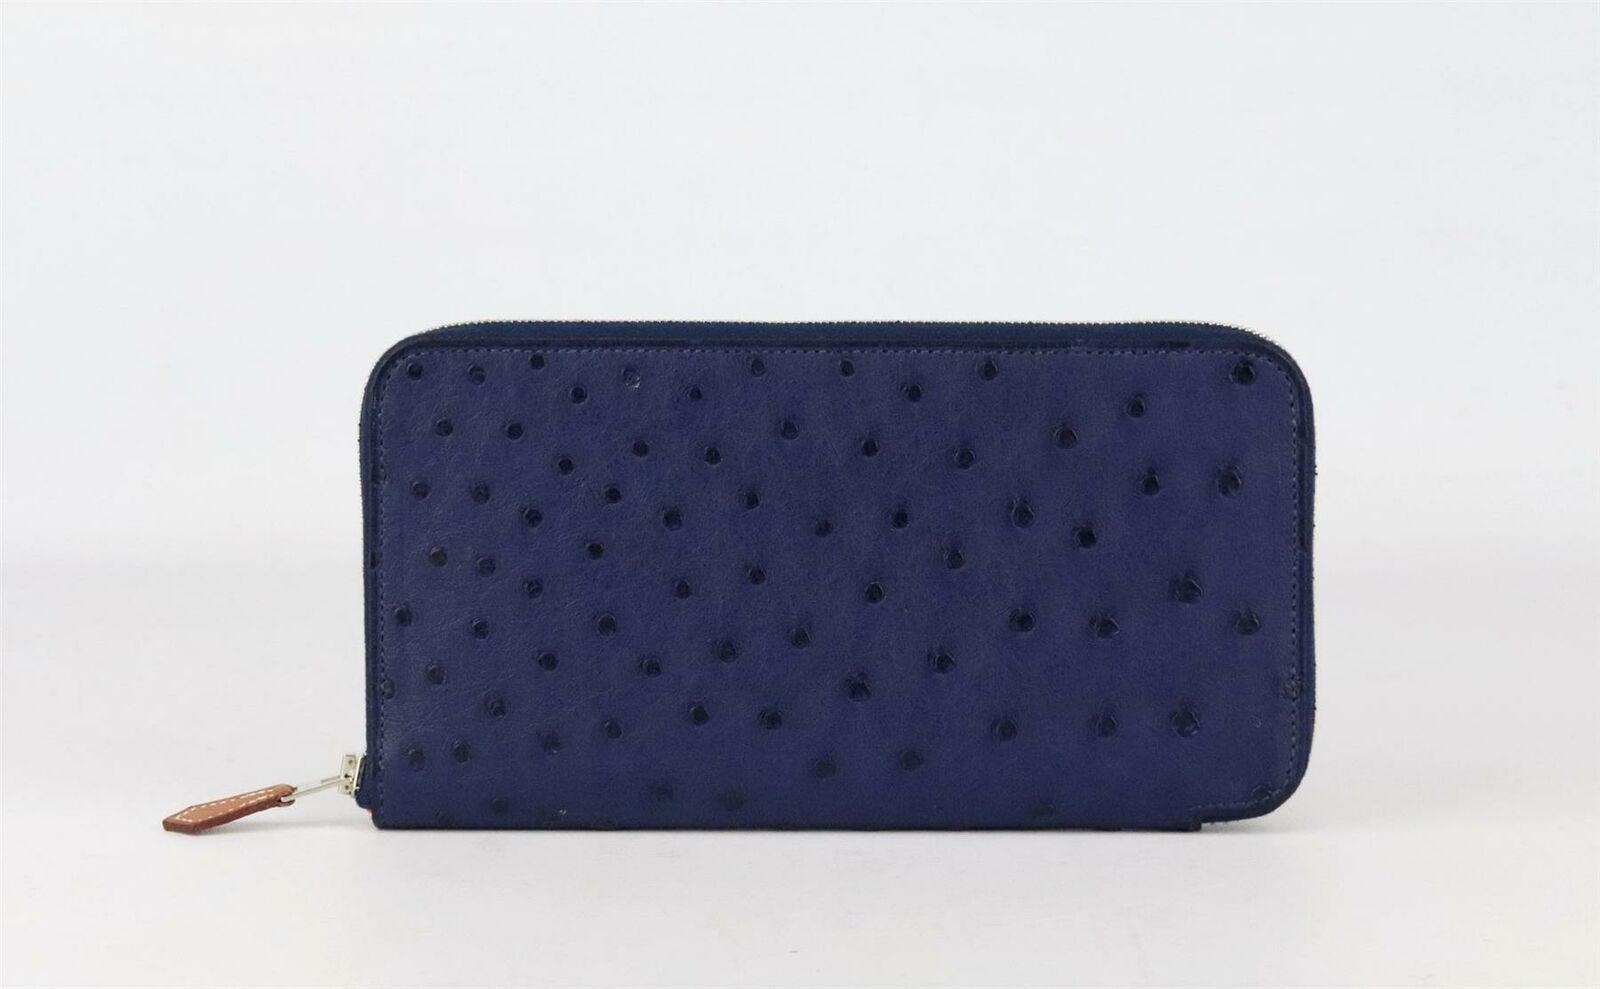 Made in France, this beautiful 2015 Hermès ‘Silk’In Azap’ wallet has been made from textured Ostrich and leather exterior in navy blue and printed silk interior in red, white and black, it is decorated with palladium H hardware on the zip and